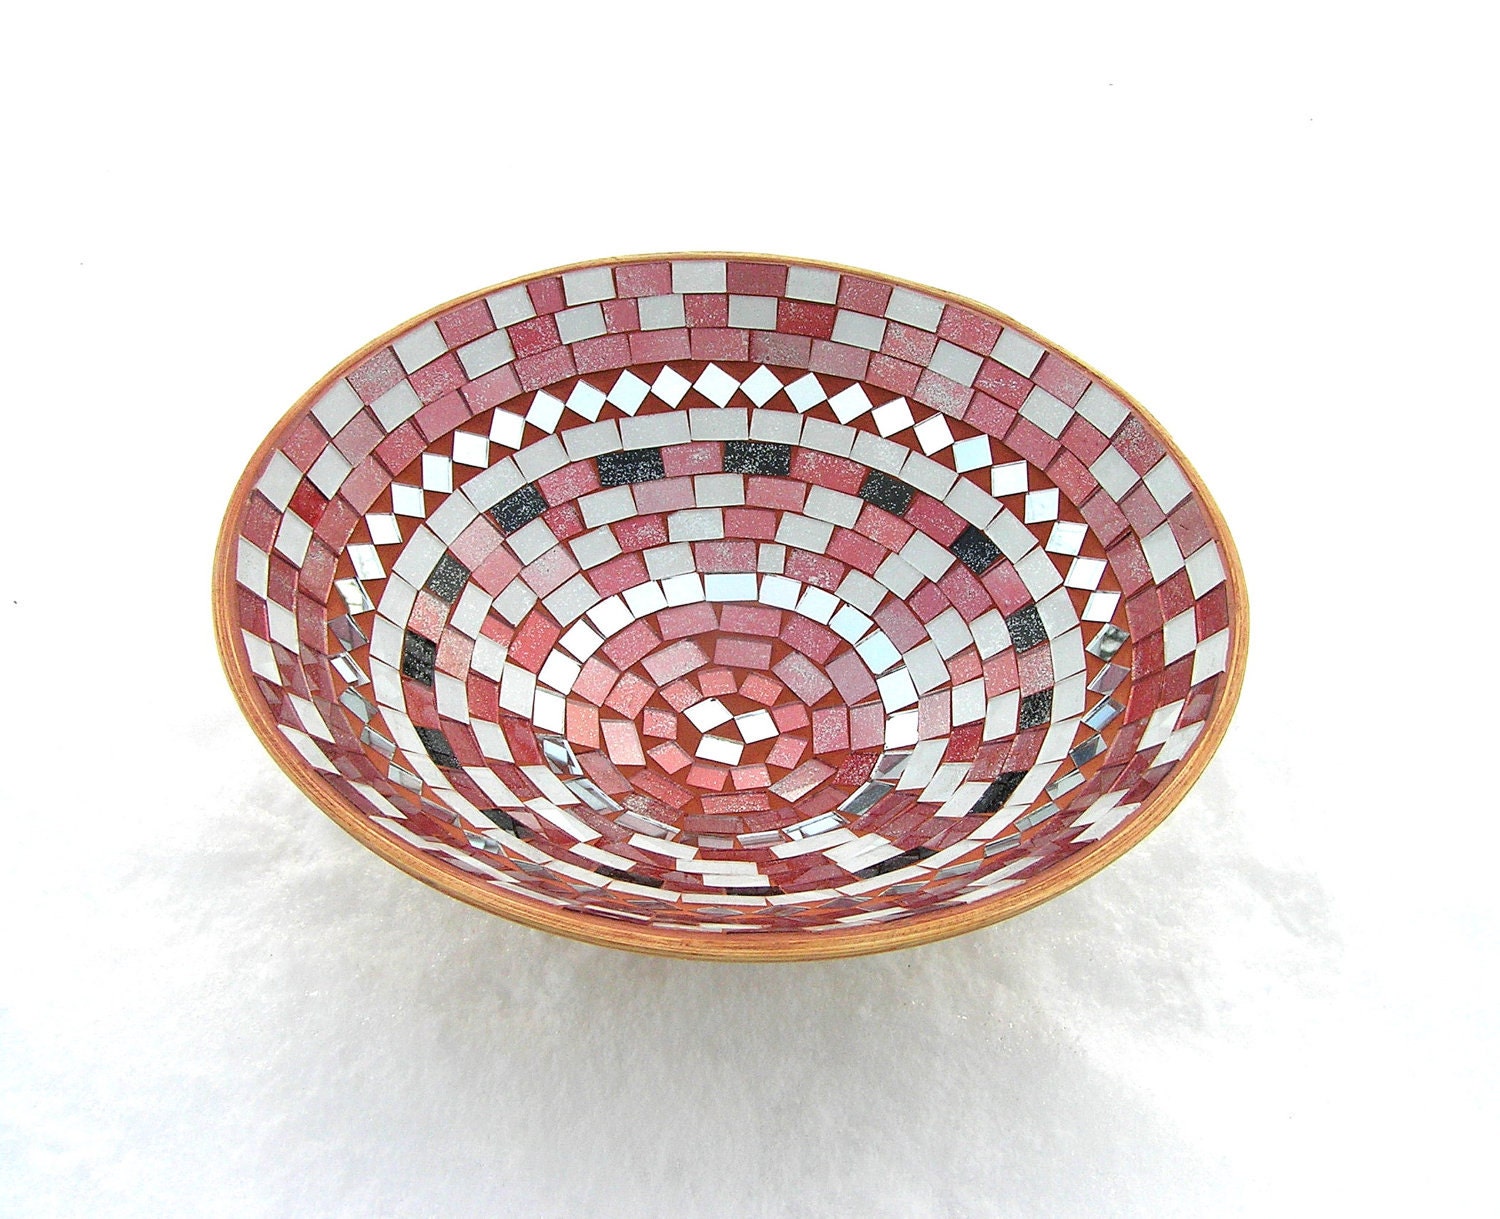 Mosaic fruit bowl red and white home decor - SirliMosaic